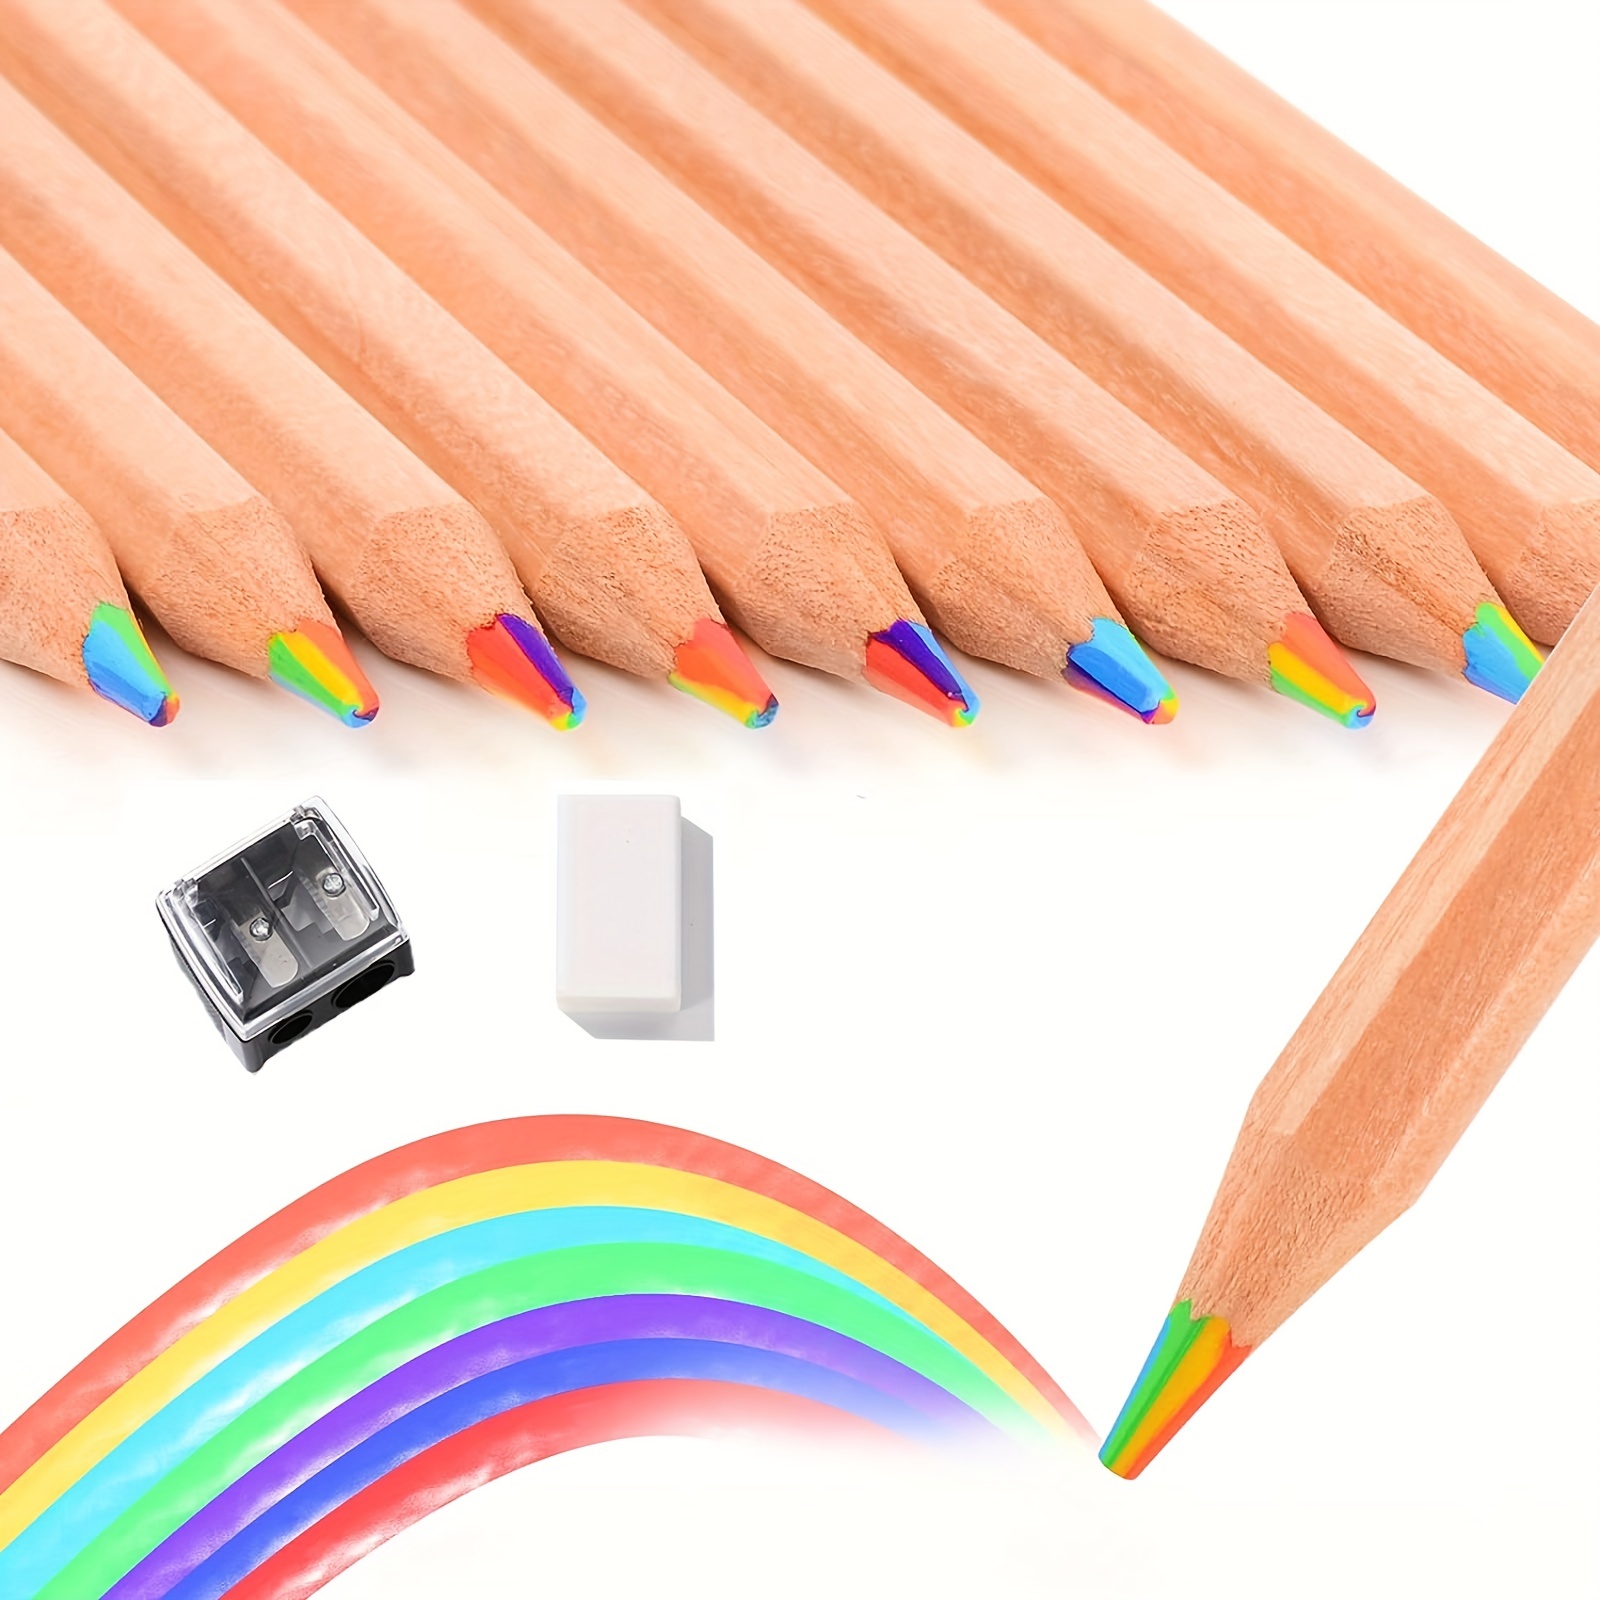 30 Pieces Rainbow Colored Pencils for Kids, 4 in 1 Color Pencils, Easter Pencil Gift Rainbow Pencil for Kids, Multi Colored Pencil, Fun Pencils